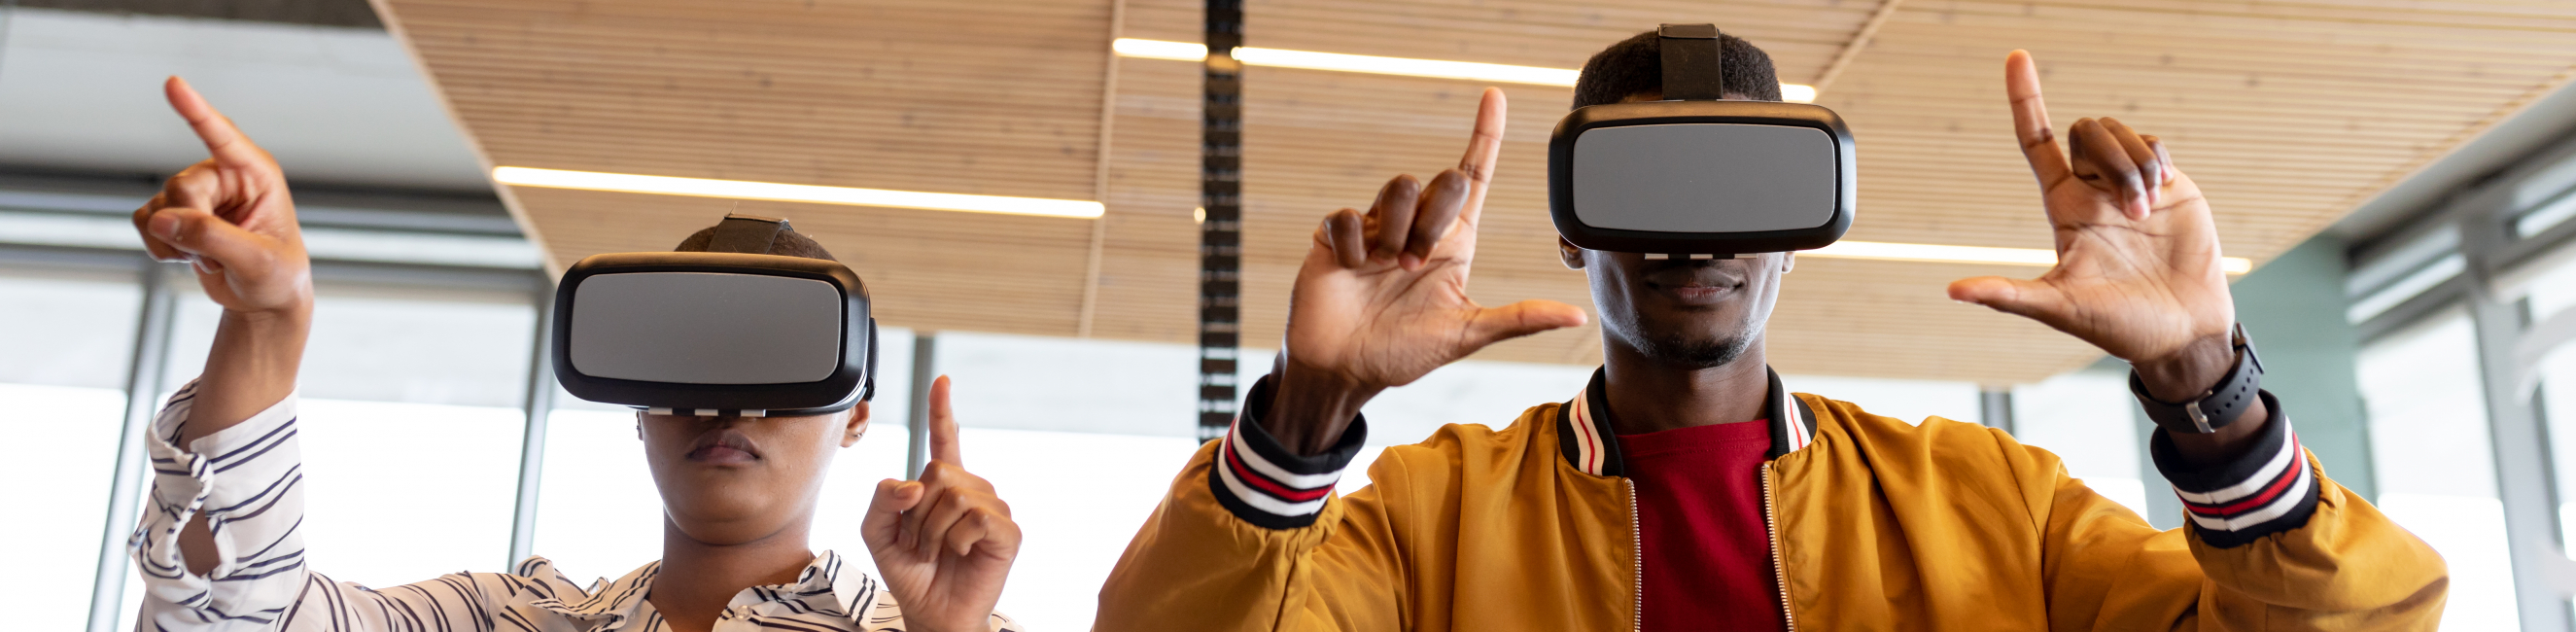 Two learners using virtual reality headsets